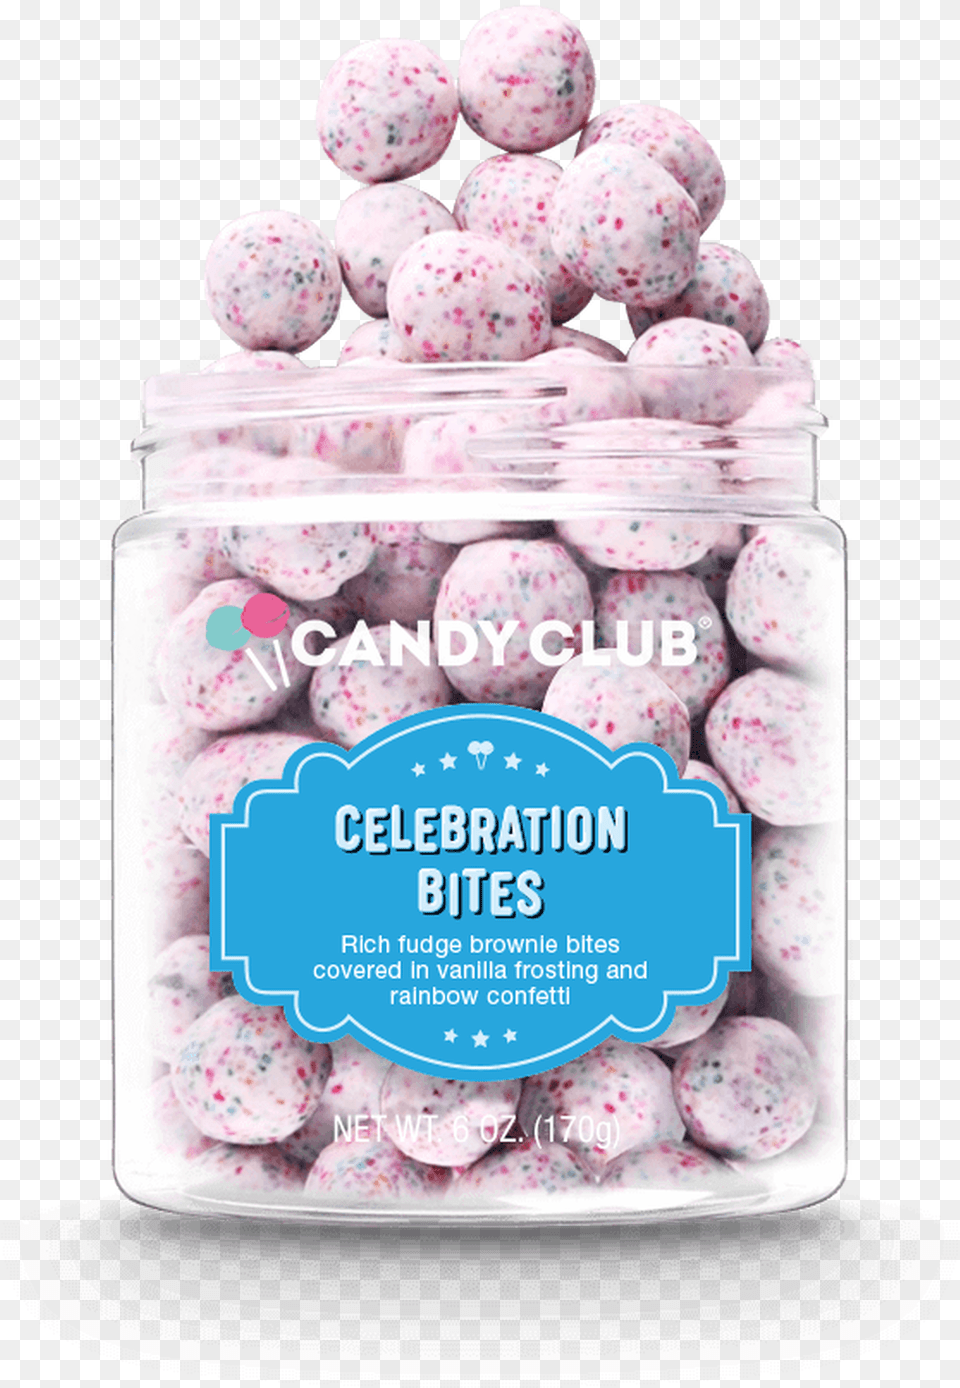 A Cup Of Celebration Bites Candy Candy Club Celebration Bites, Jar, Food, Sweets, Cream Free Png Download